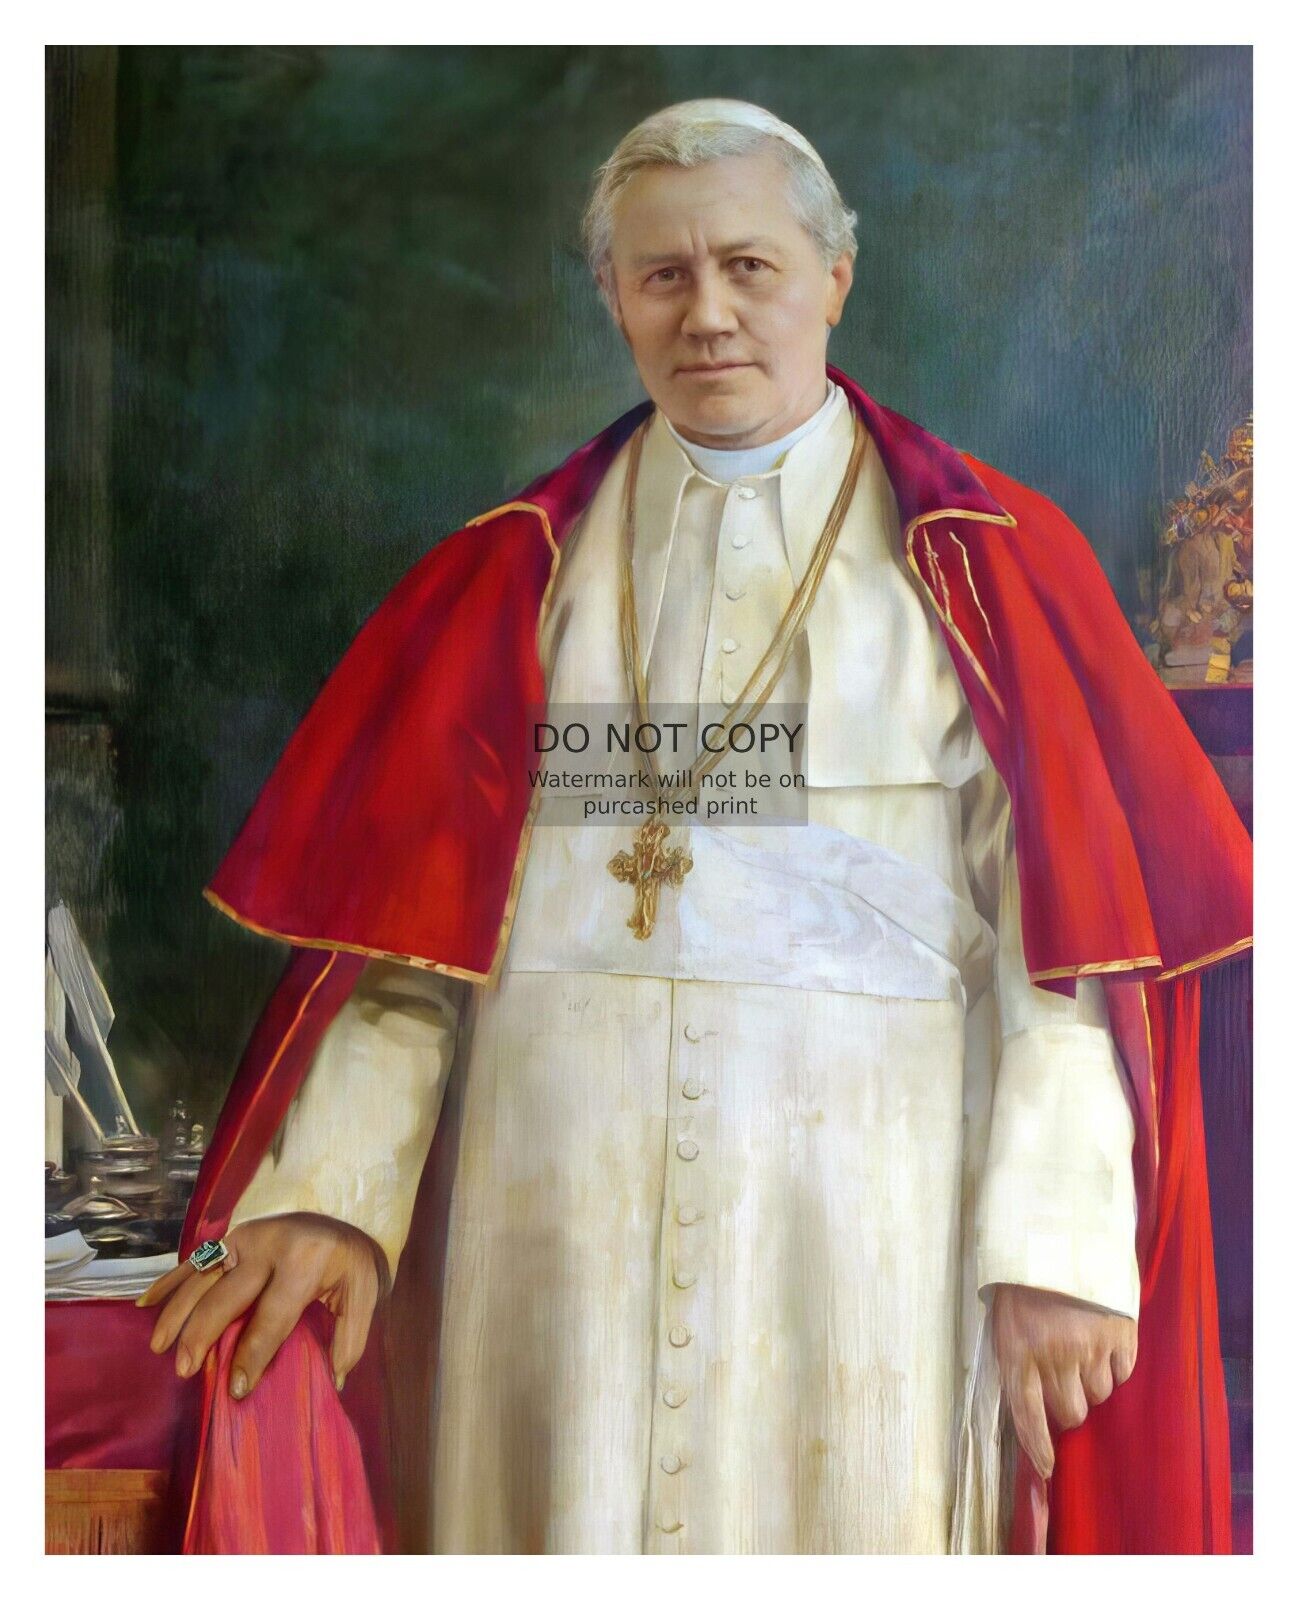 POPE ST PIUS X HEAD OF CATHOLIC CHURCH AND VATICAN STATE 8X10 PHOTO